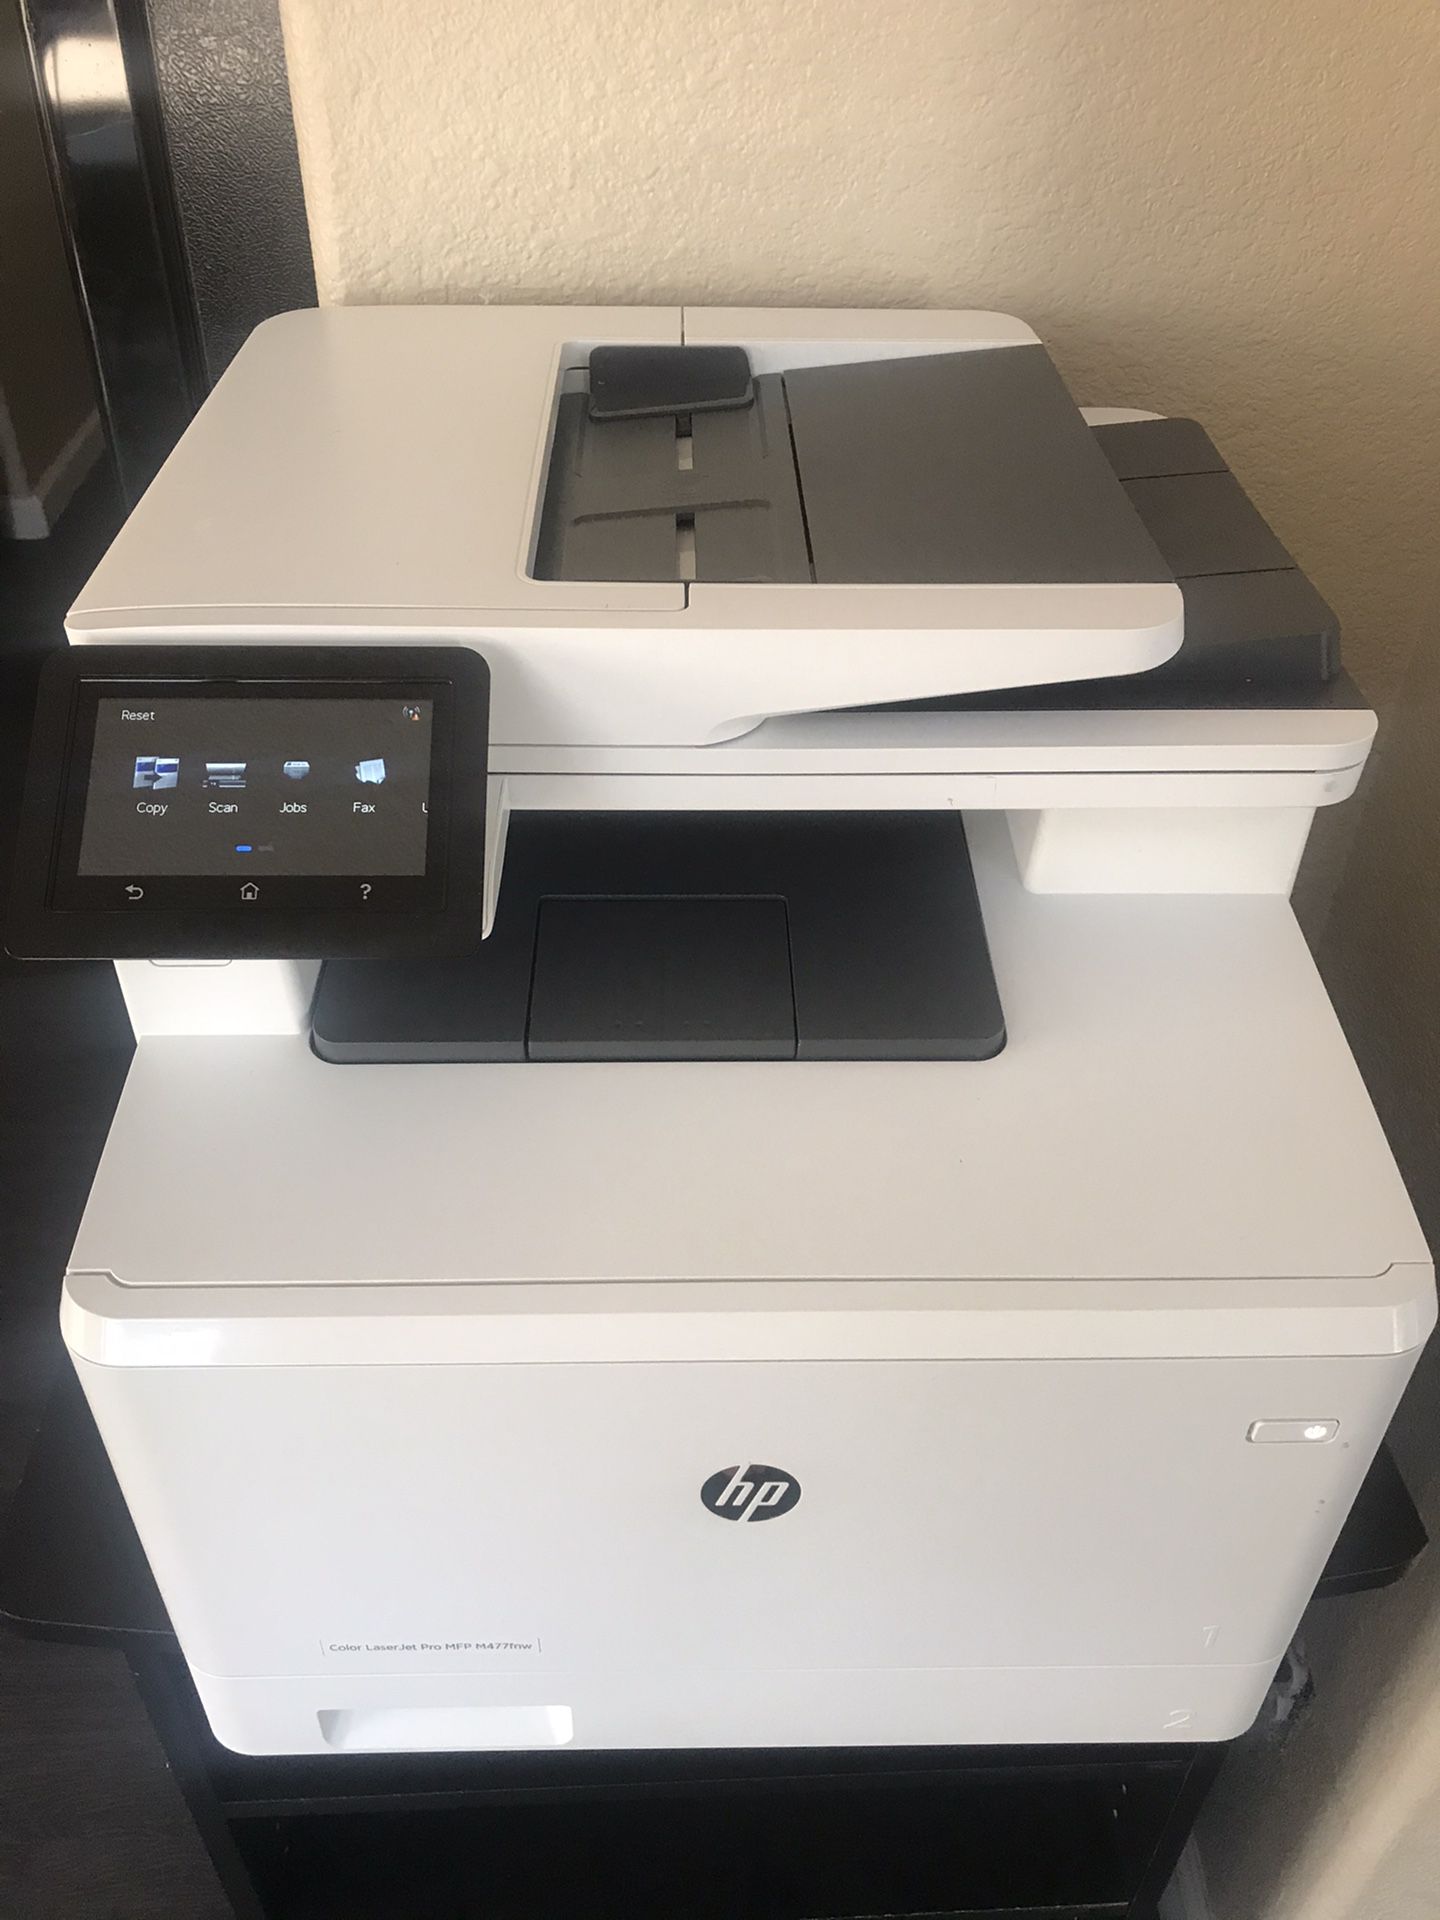 Awesome HP Color LaserJet Pro MFP M477fnw Printer. Like New works and it has ink. Can get on Amazon now for $598.90 + shipping or save money and get t